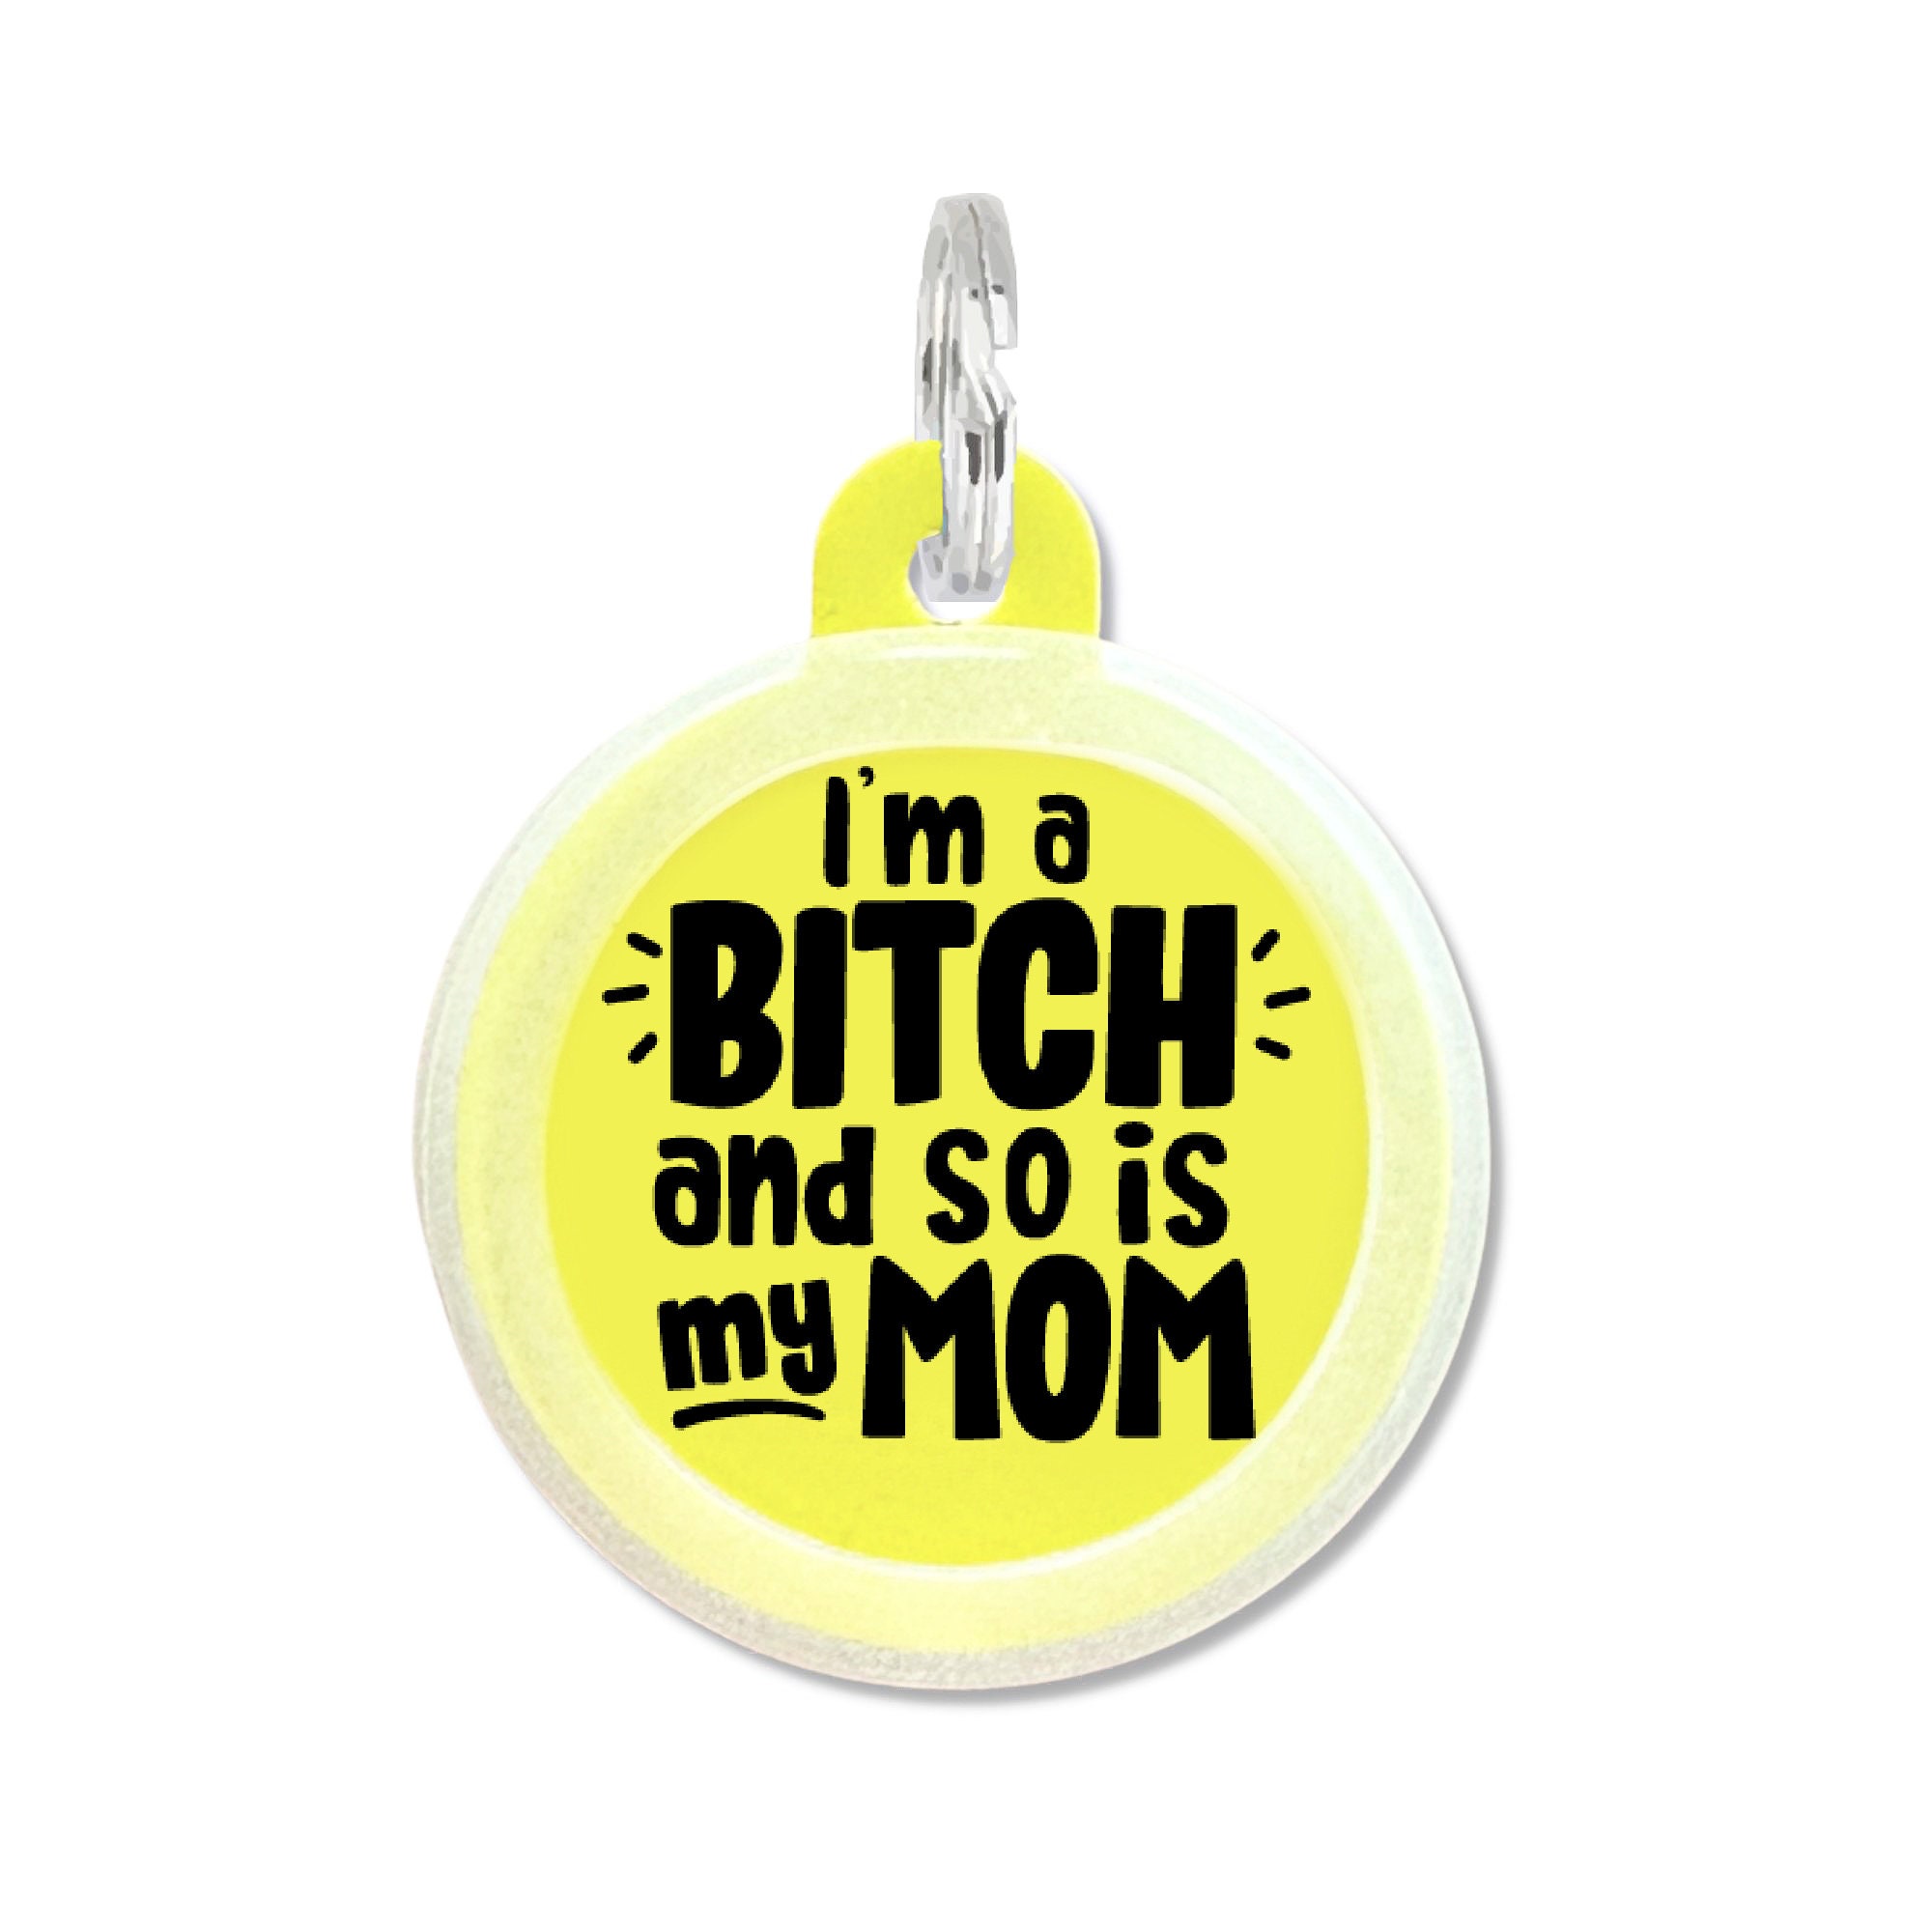 Funny Inappropriate Dog ID Tags for Dogs Custom Personalized 